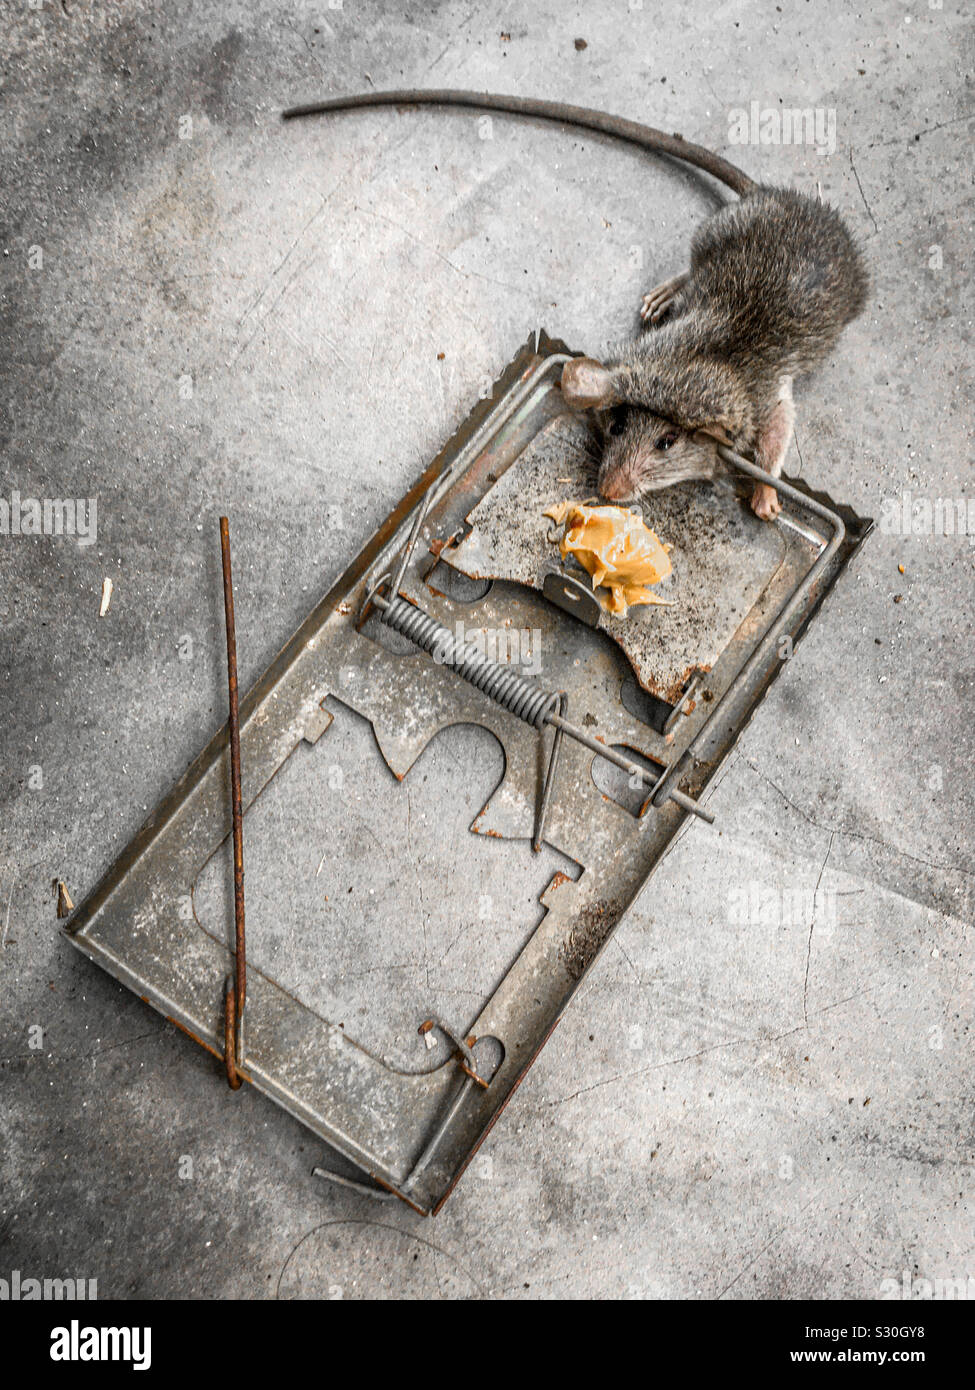 Dead rat in metal spring trap baited with peanut butter on concrete floor.  No branding Stock Photo - Alamy